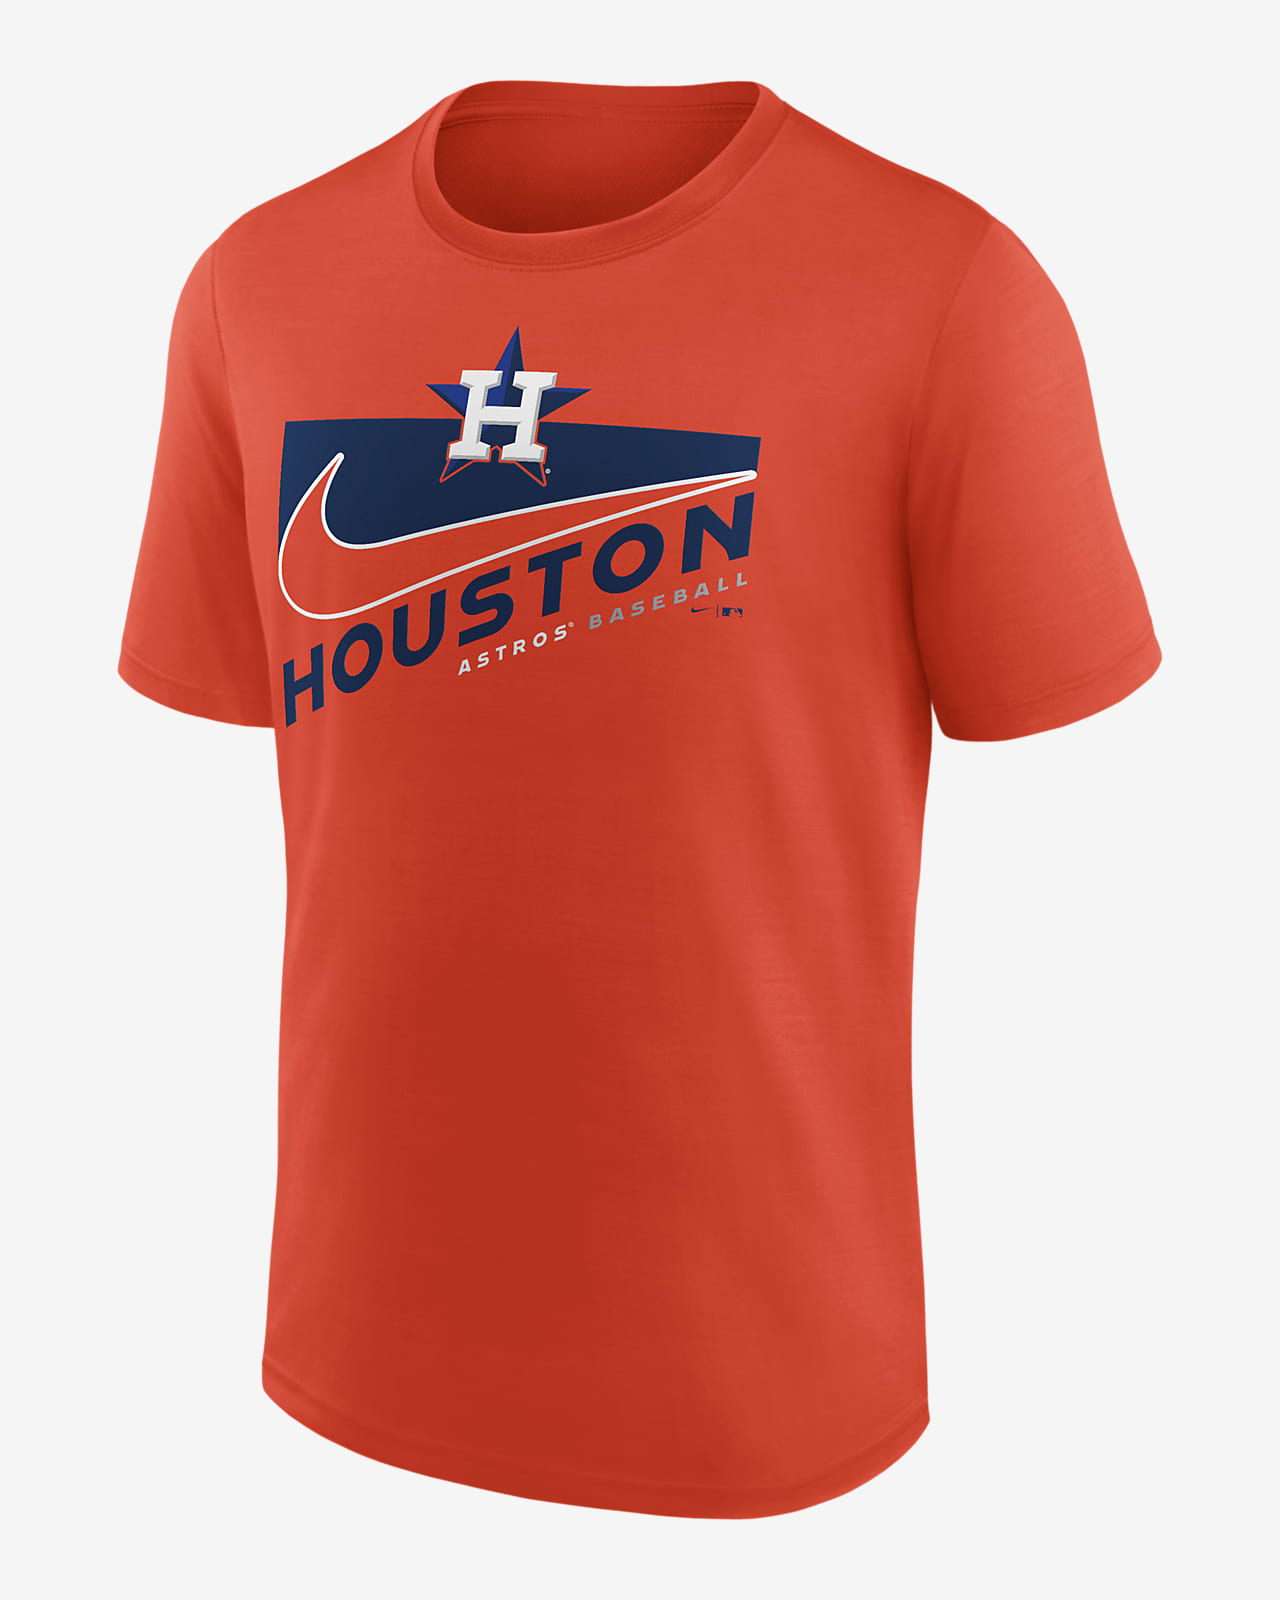 Houston Astros Dri-fit Shirts for Sale in San Juan, TX - OfferUp